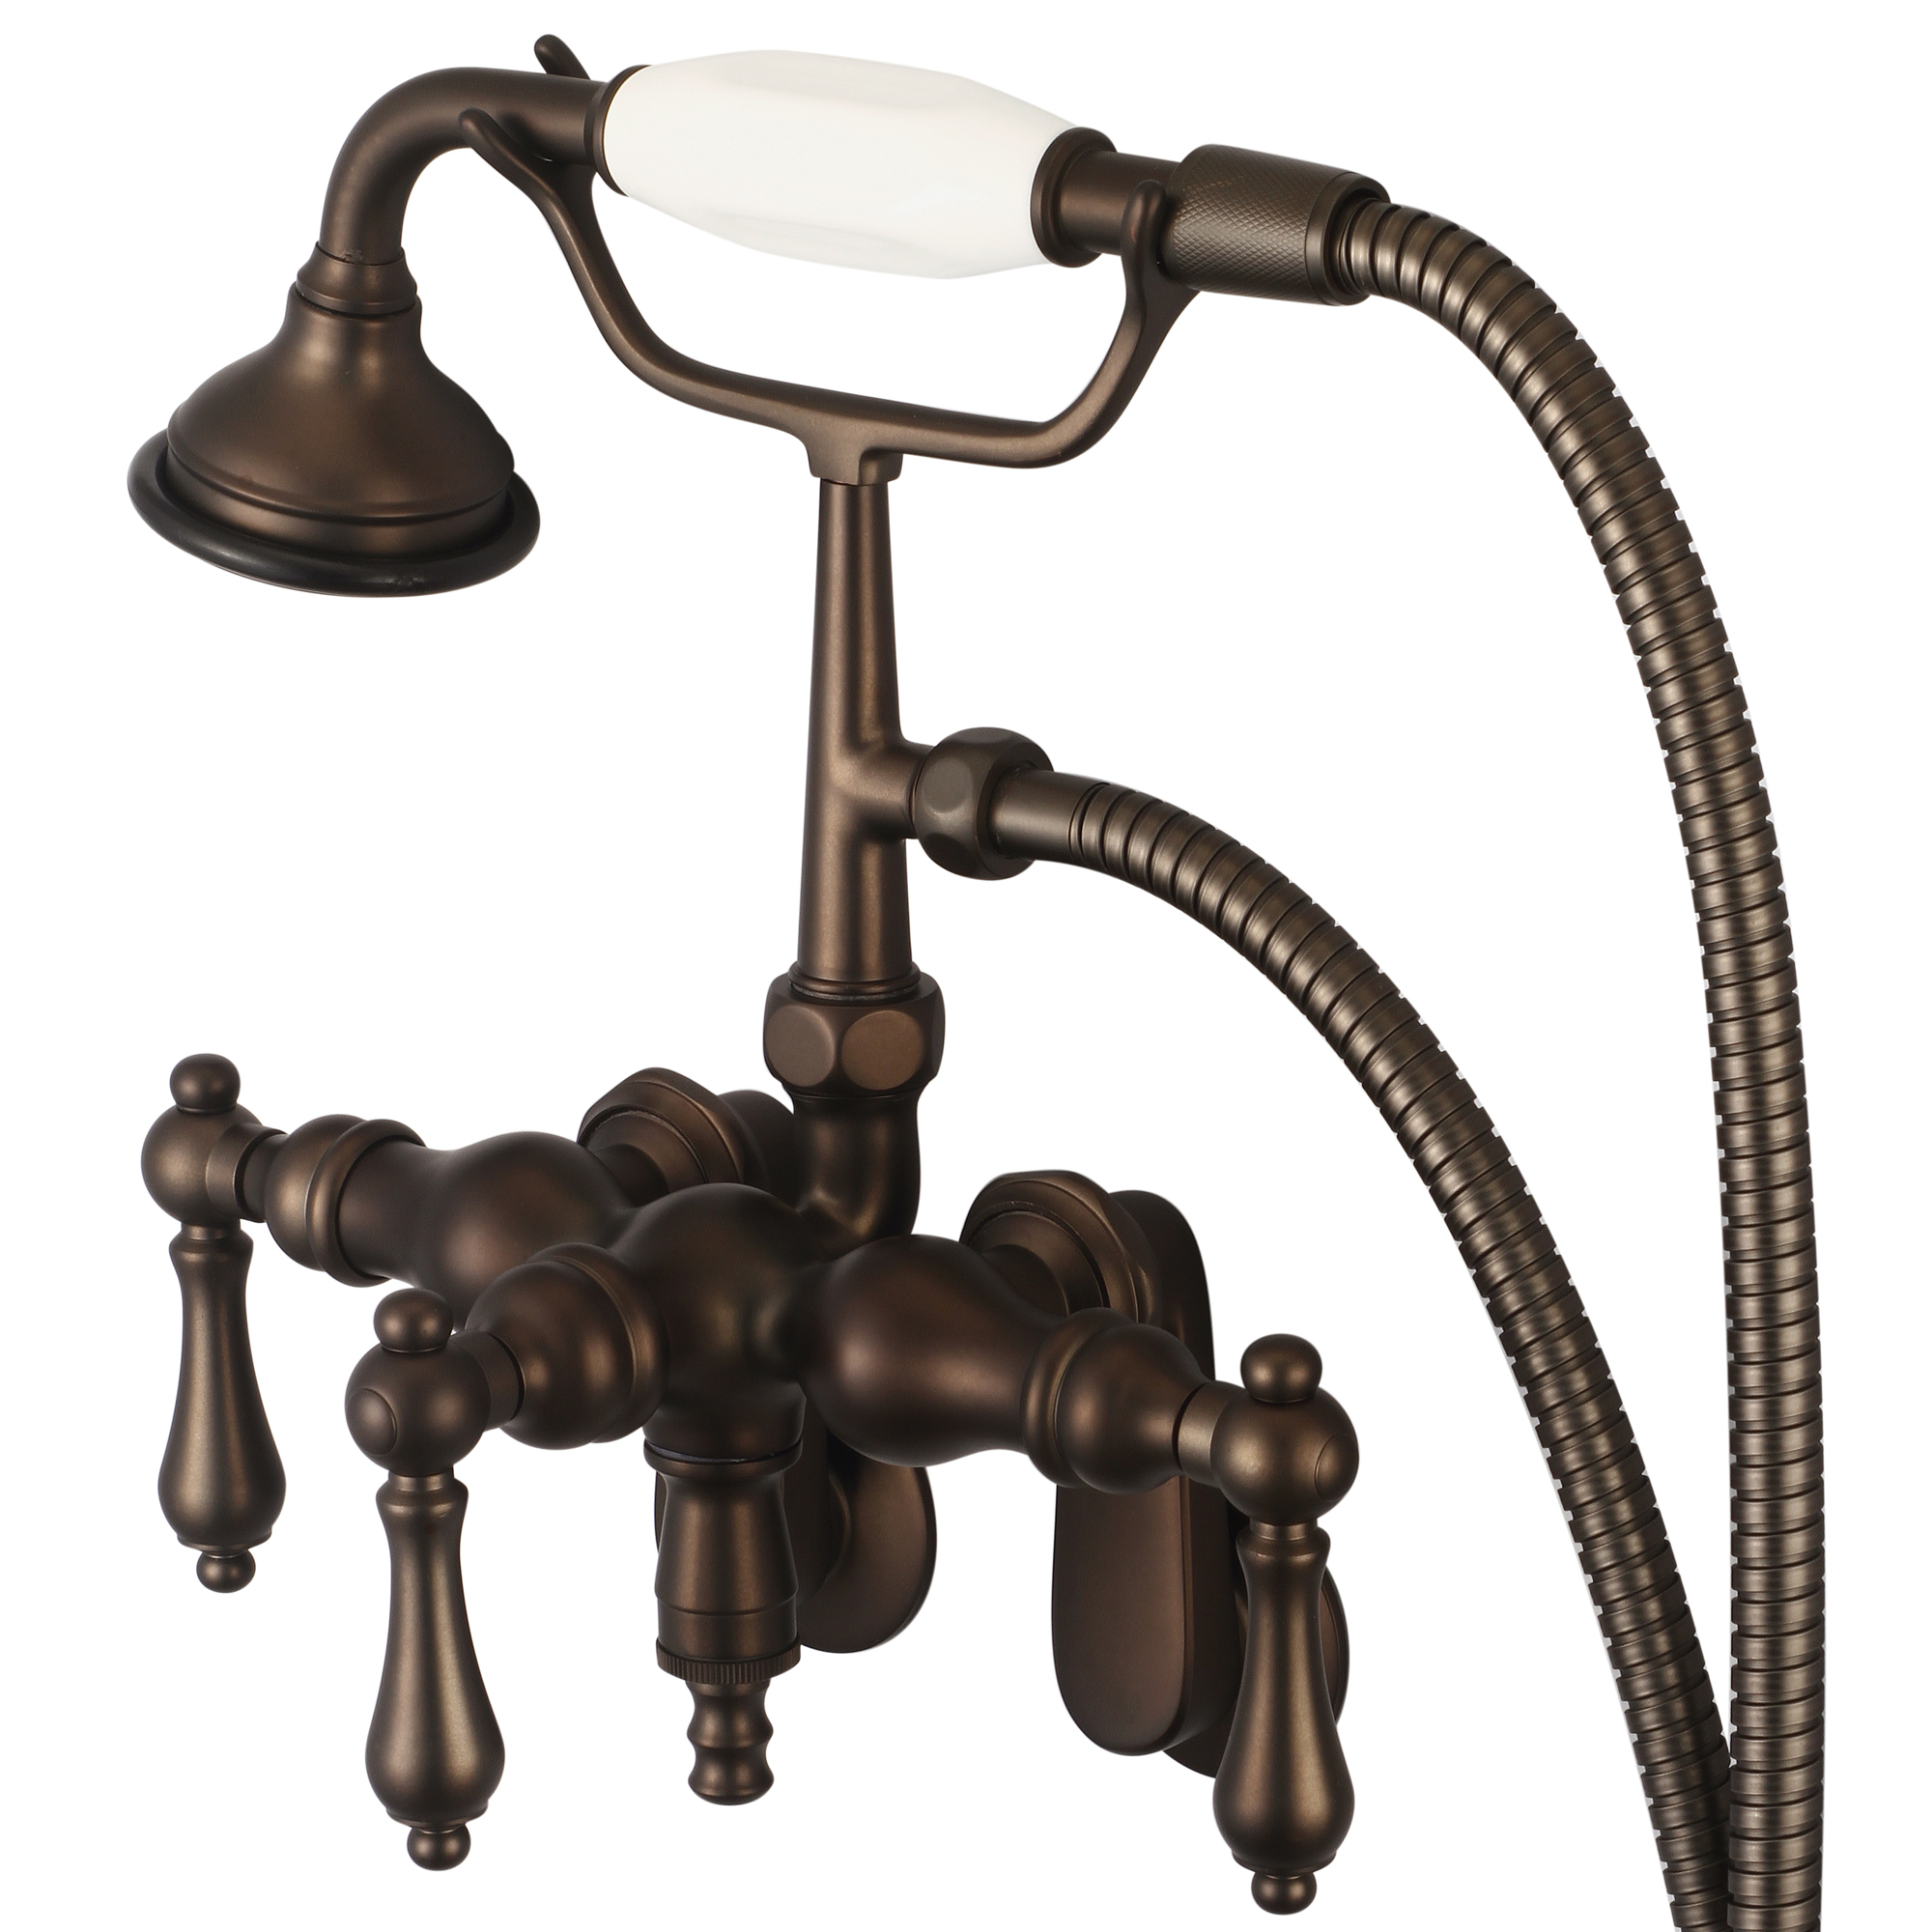 Vintage Classic Adjustable Center Wall Mount Tub Faucet With Down Spout, Swivel Wall Connector & Handheld Shower in Oil-rubbed Bronze Finish Finish With Metal Lever Handles Without Labels